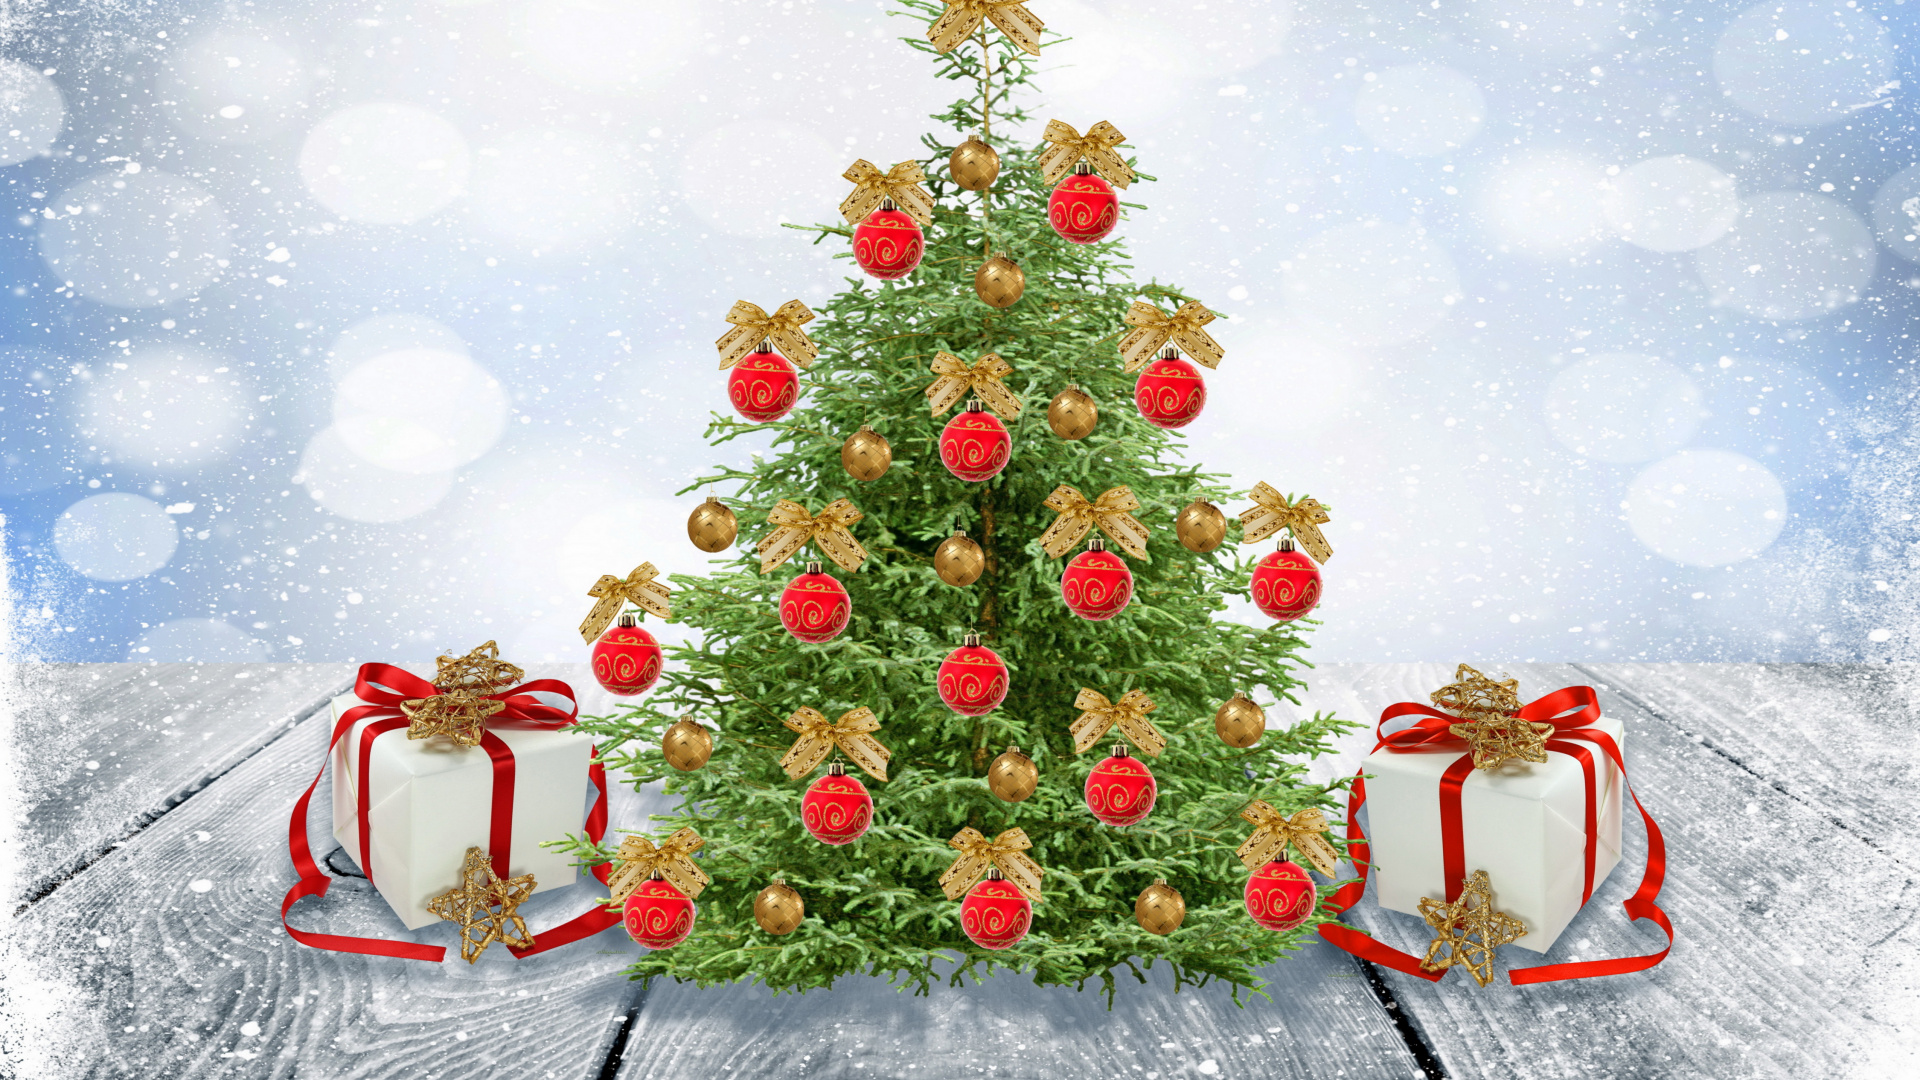 New Year, Christmas Day, Santa Claus, Christmas Tree, Christmas Decoration. Wallpaper in 1920x1080 Resolution